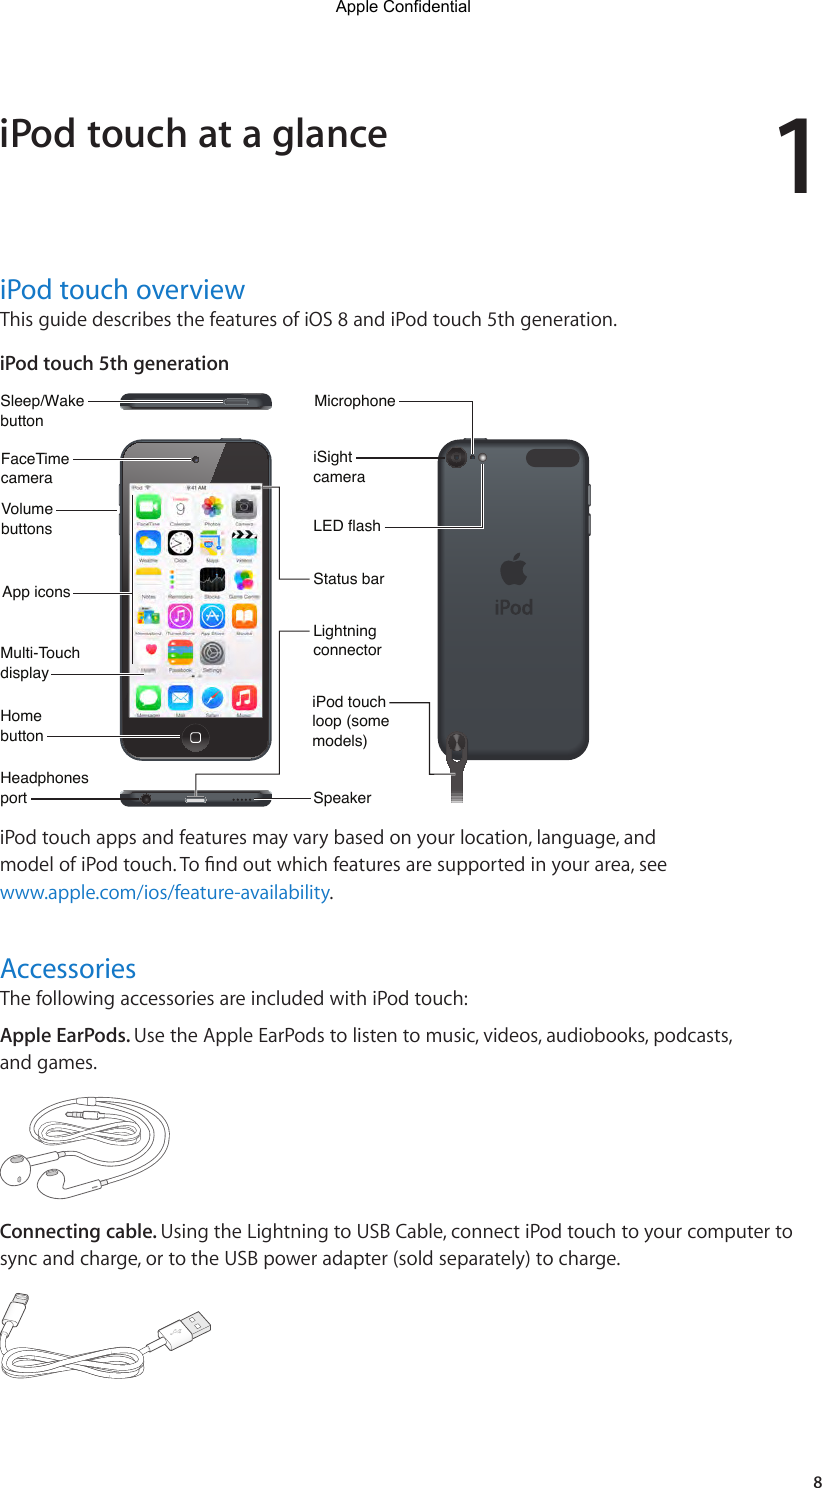 18iPod touch overviewThis guide describes the features of iOS 8 and iPod touch 5th generation. iPod touch 5th generationMicrophoneMicrophoneiSightcameraiSightcameraLED flashLED flashiPod touchloop (somemodels)iPod touchloop (somemodels)Sleep/WakebuttonSleep/WakebuttonVolumebuttonsVolumebuttonsHeadphonesportHeadphonesportFaceTimecameraFaceTimecameraHomebuttonHomebuttonMulti-TouchdisplayMulti-TouchdisplaySpeakerSpeakerLightningconnectorLightningconnectorApp iconsApp iconsStatus barStatus bariPod touch apps and features may vary based on your location, language, and modelofiPodtouch.Tondoutwhichfeaturesaresupportedinyourarea,seewww.apple.com/ios/feature-availability.AccessoriesThe following accessories are included with iPod touch:Apple EarPods. Use the Apple EarPods to listen to music, videos, audiobooks, podcasts, and games.Connecting cable. Using the Lightning to USB Cable, connect iPod touch to your computer to sync and charge, or to the USB power adapter (sold separately) to charge.iPod touch at a glanceApple Confidential